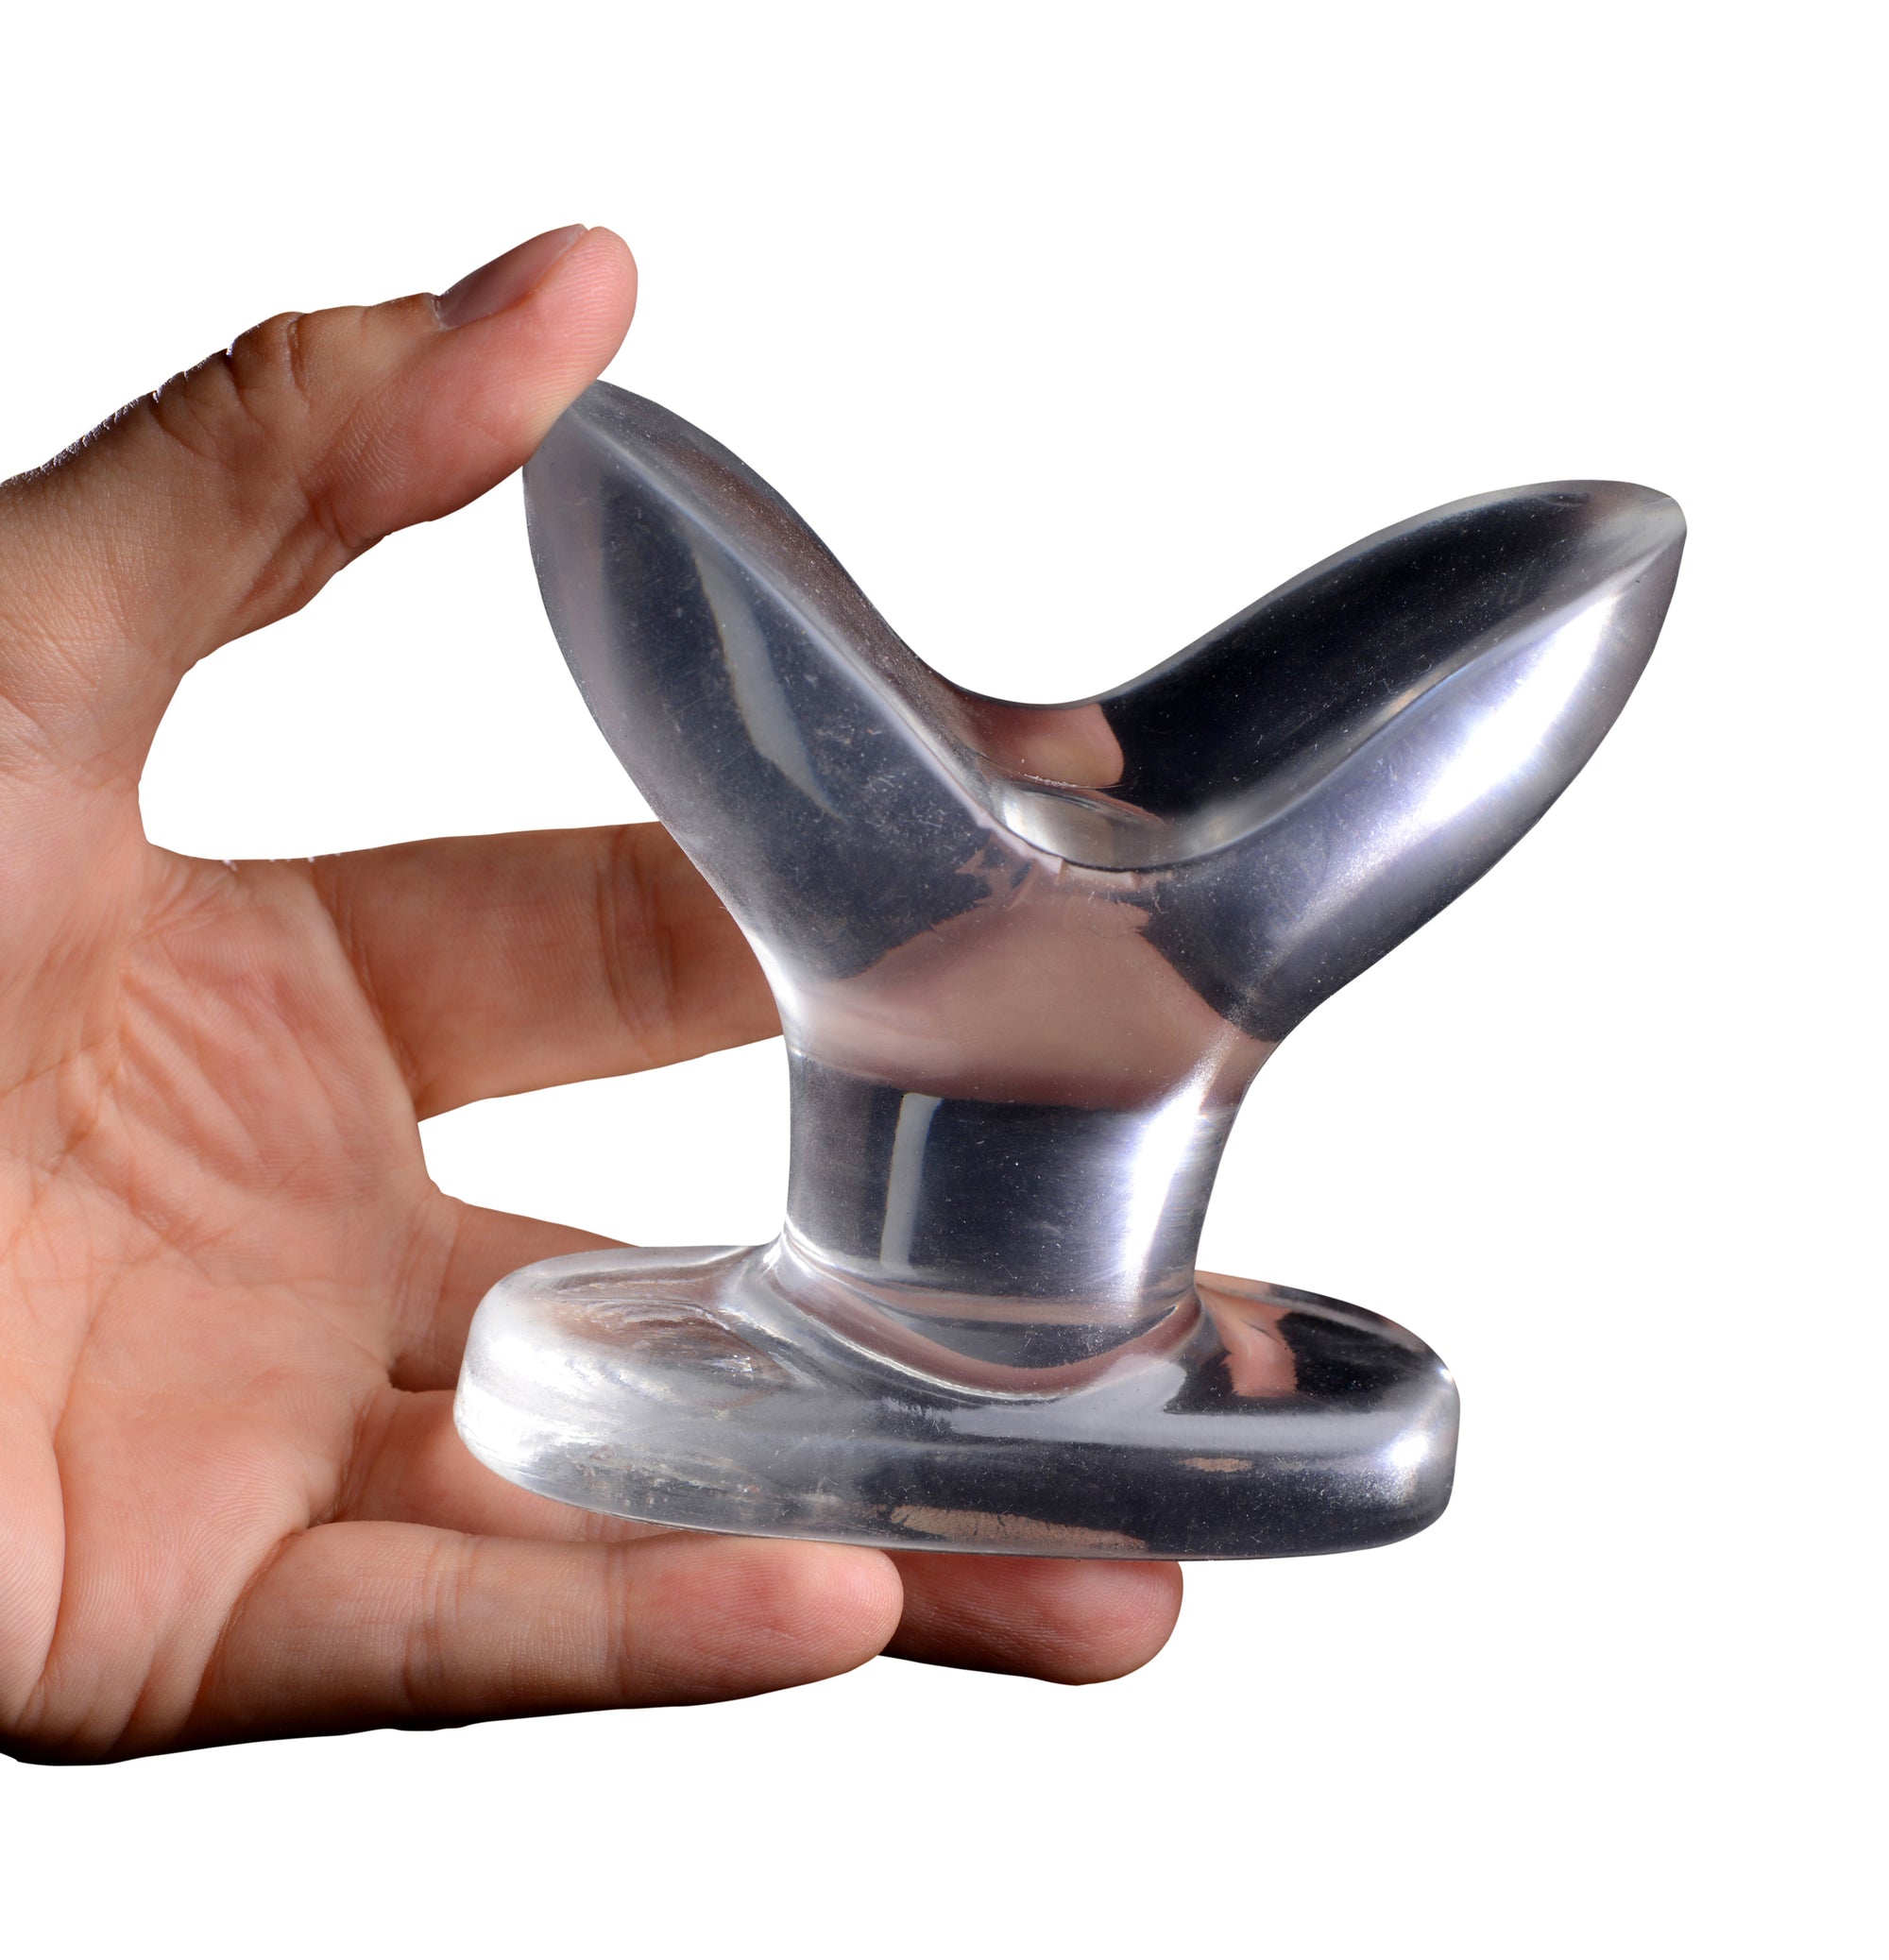 Anchored Clear Anal Plug | CupidsSecretStash.com
Open up so your partner can take a peek inside your hole! Expanding anchor-shaped plug. At Cupid’s Secret Stash 
Anal Toys
Master Series Cupid’s Secret Stash